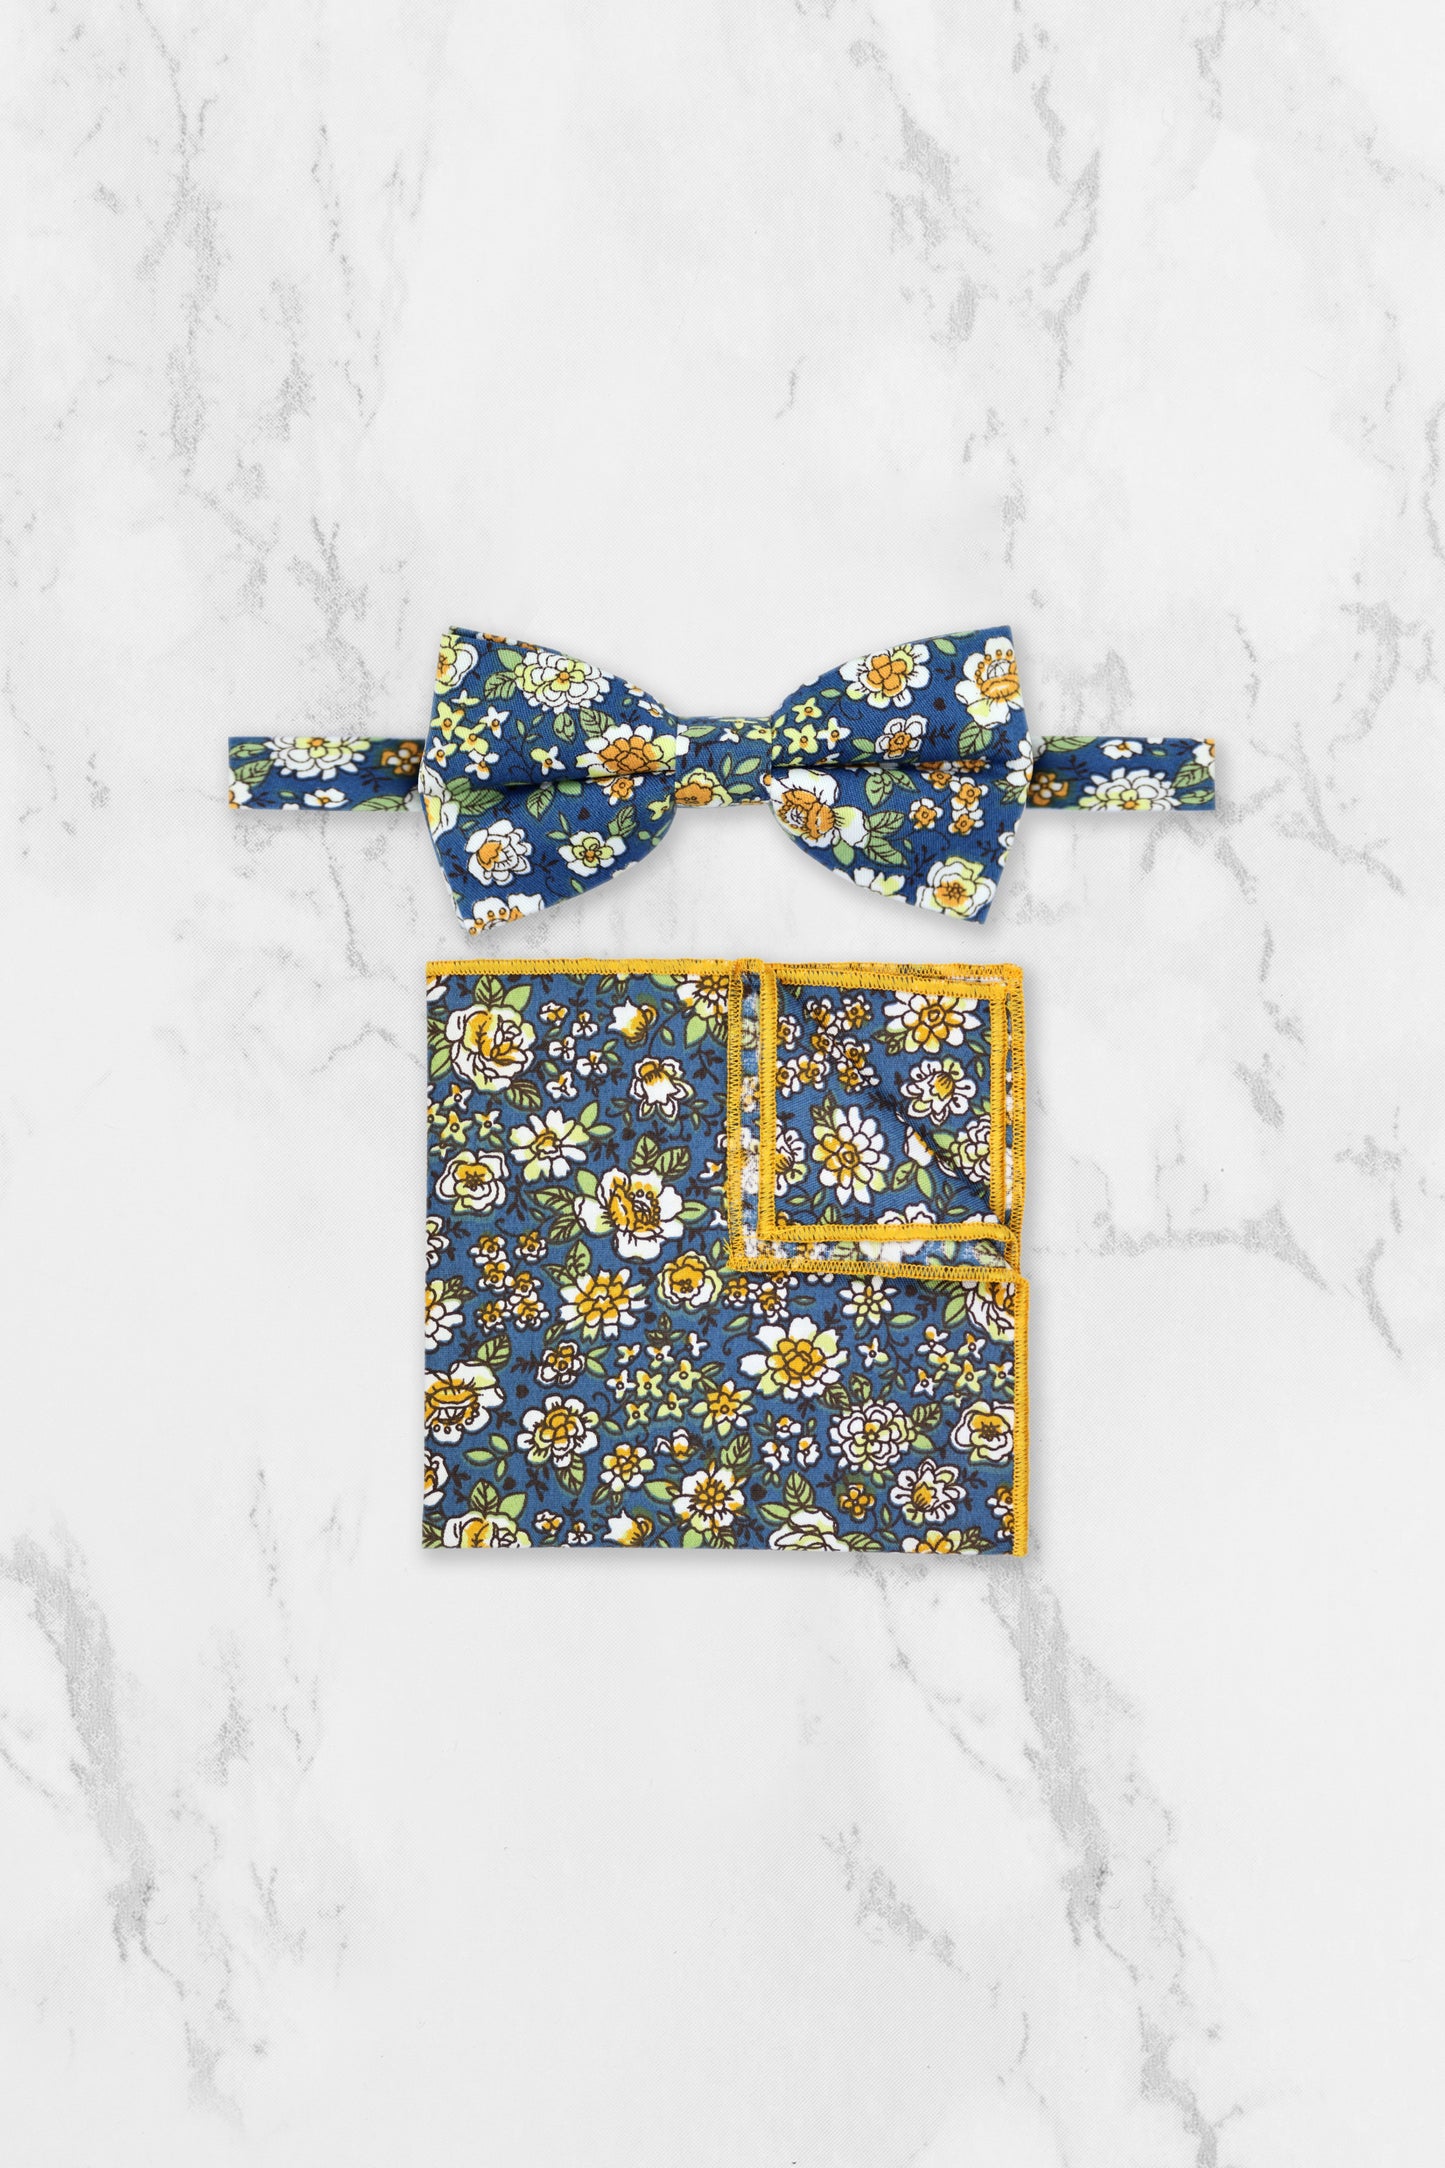 100% Cotton Floral Print Bow Tie - Blue & Yellow